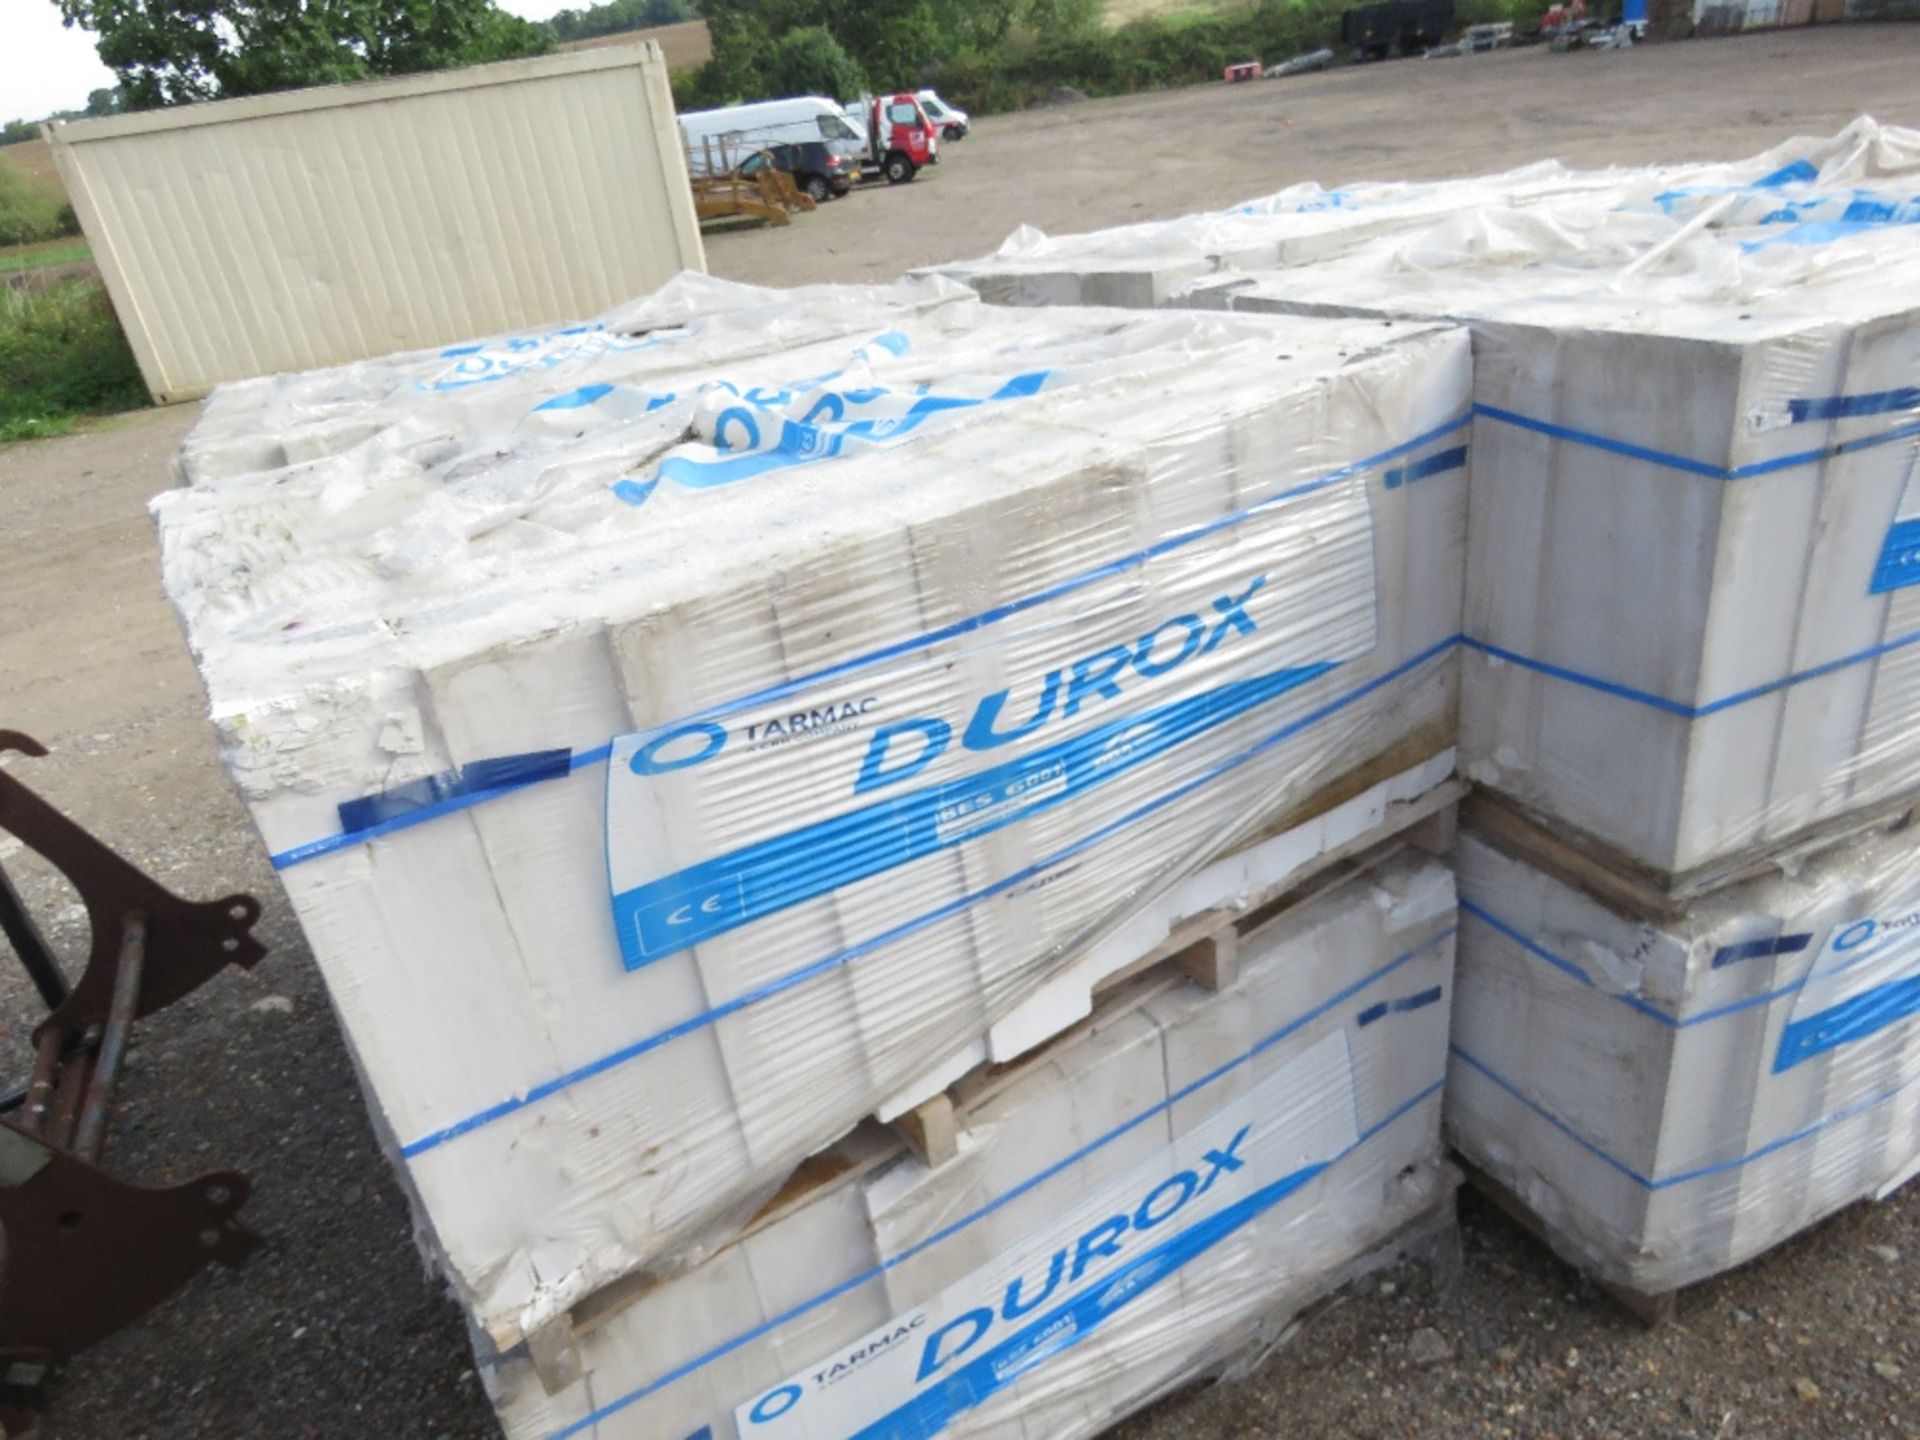 8 X PACKS OF DUROX LIGHTWEIGHT BUILDING BLOCKS 60 X 14 X 20CM APPROX, 50NO PER PACK, 100NO IN TOTAL - Image 4 of 4